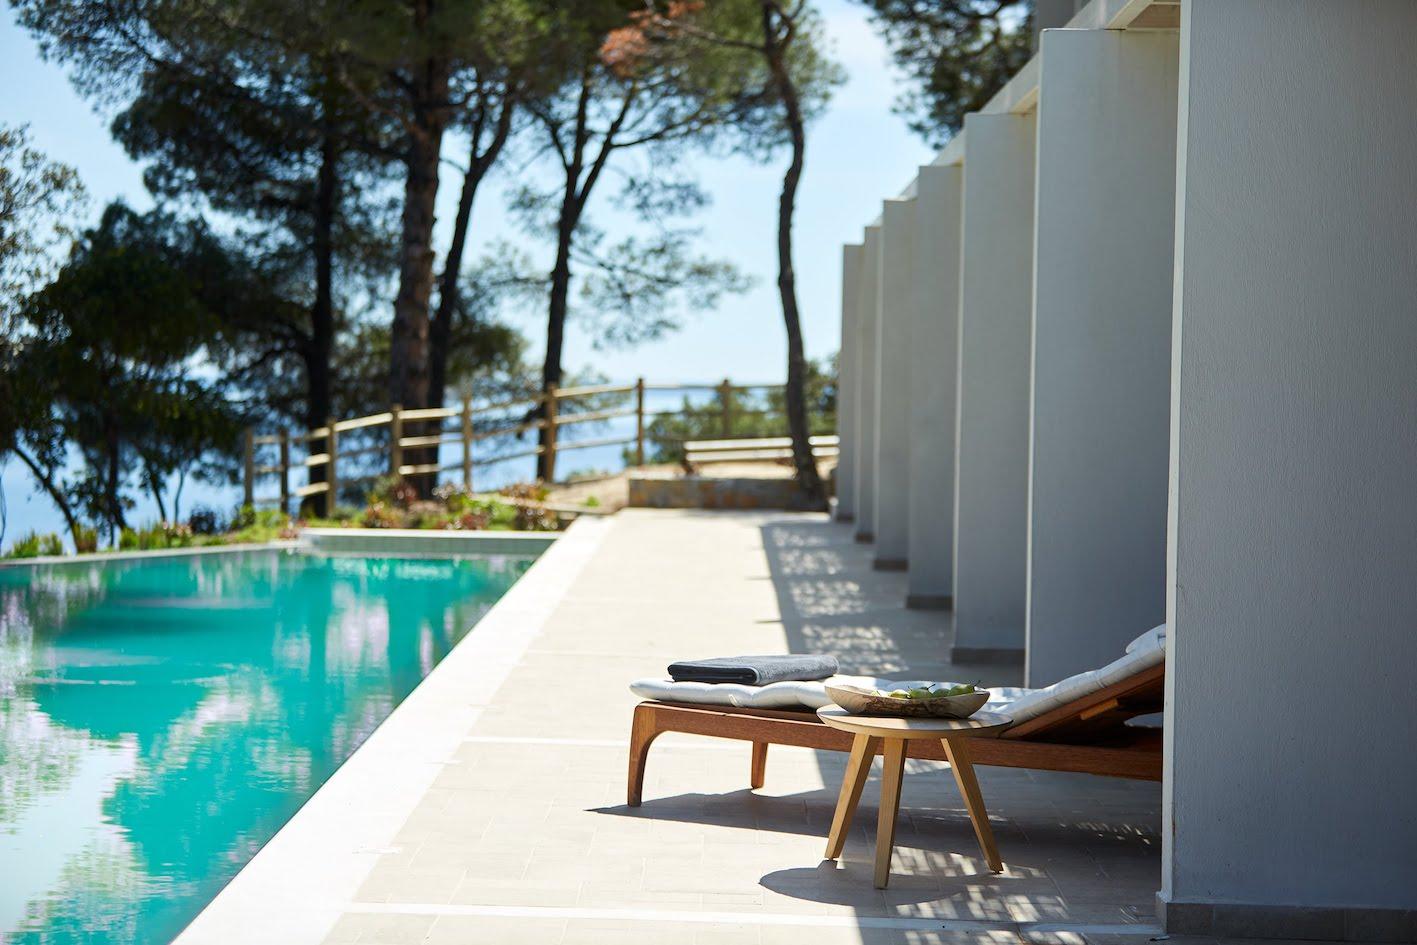 The resort will boast an outdoor pool located on the hilltop overlooking Ambelakia Beach and the Aegean Sea / 